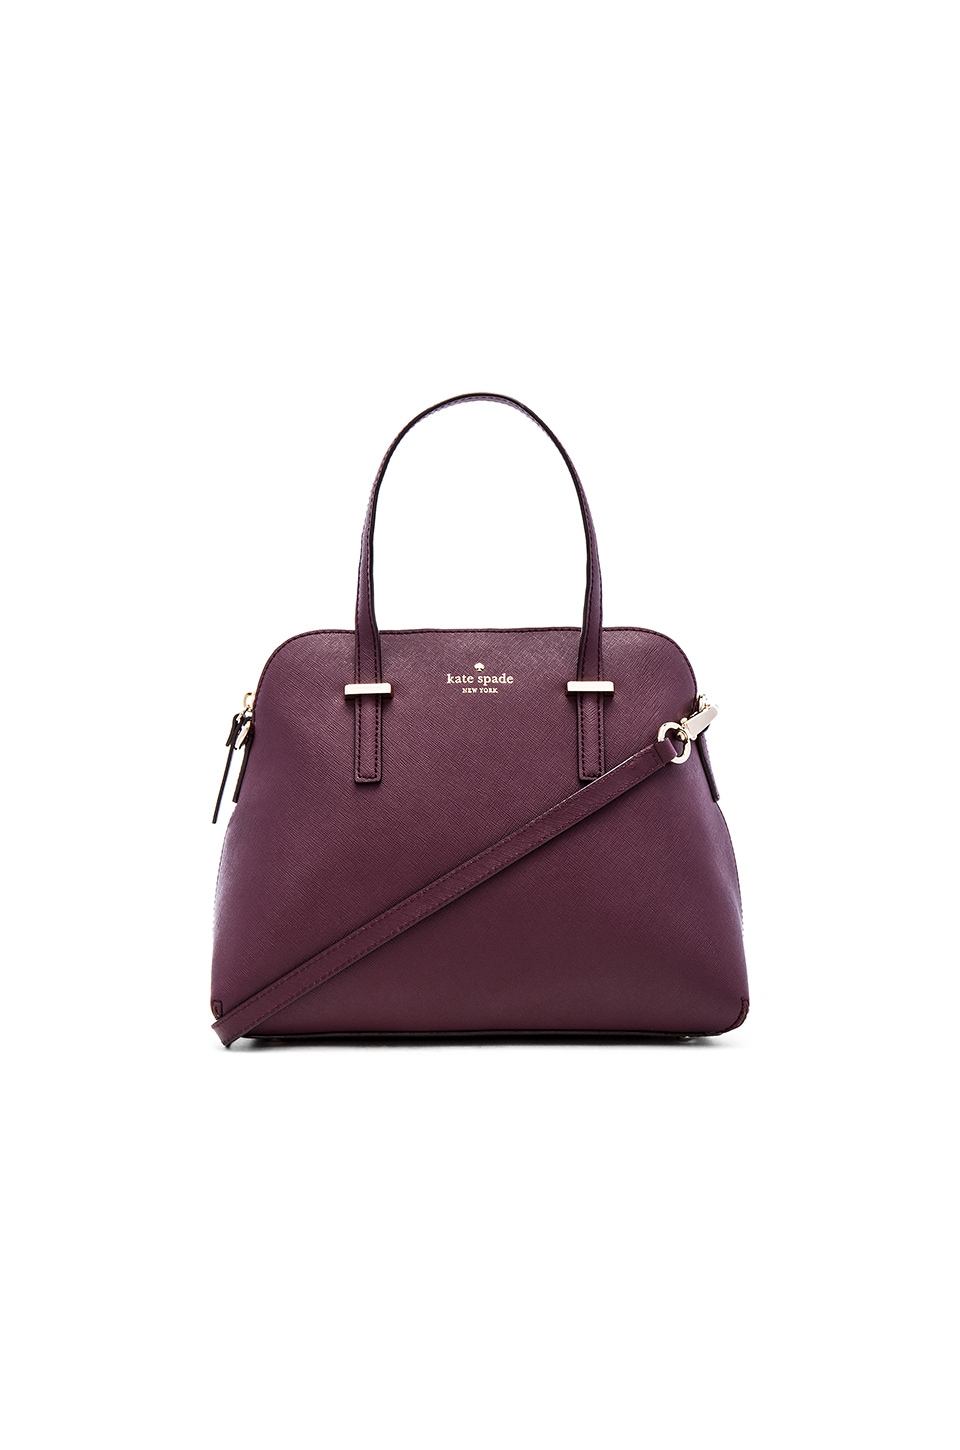 kate spade new york Maise Satchel in Mulled Wine | REVOLVE